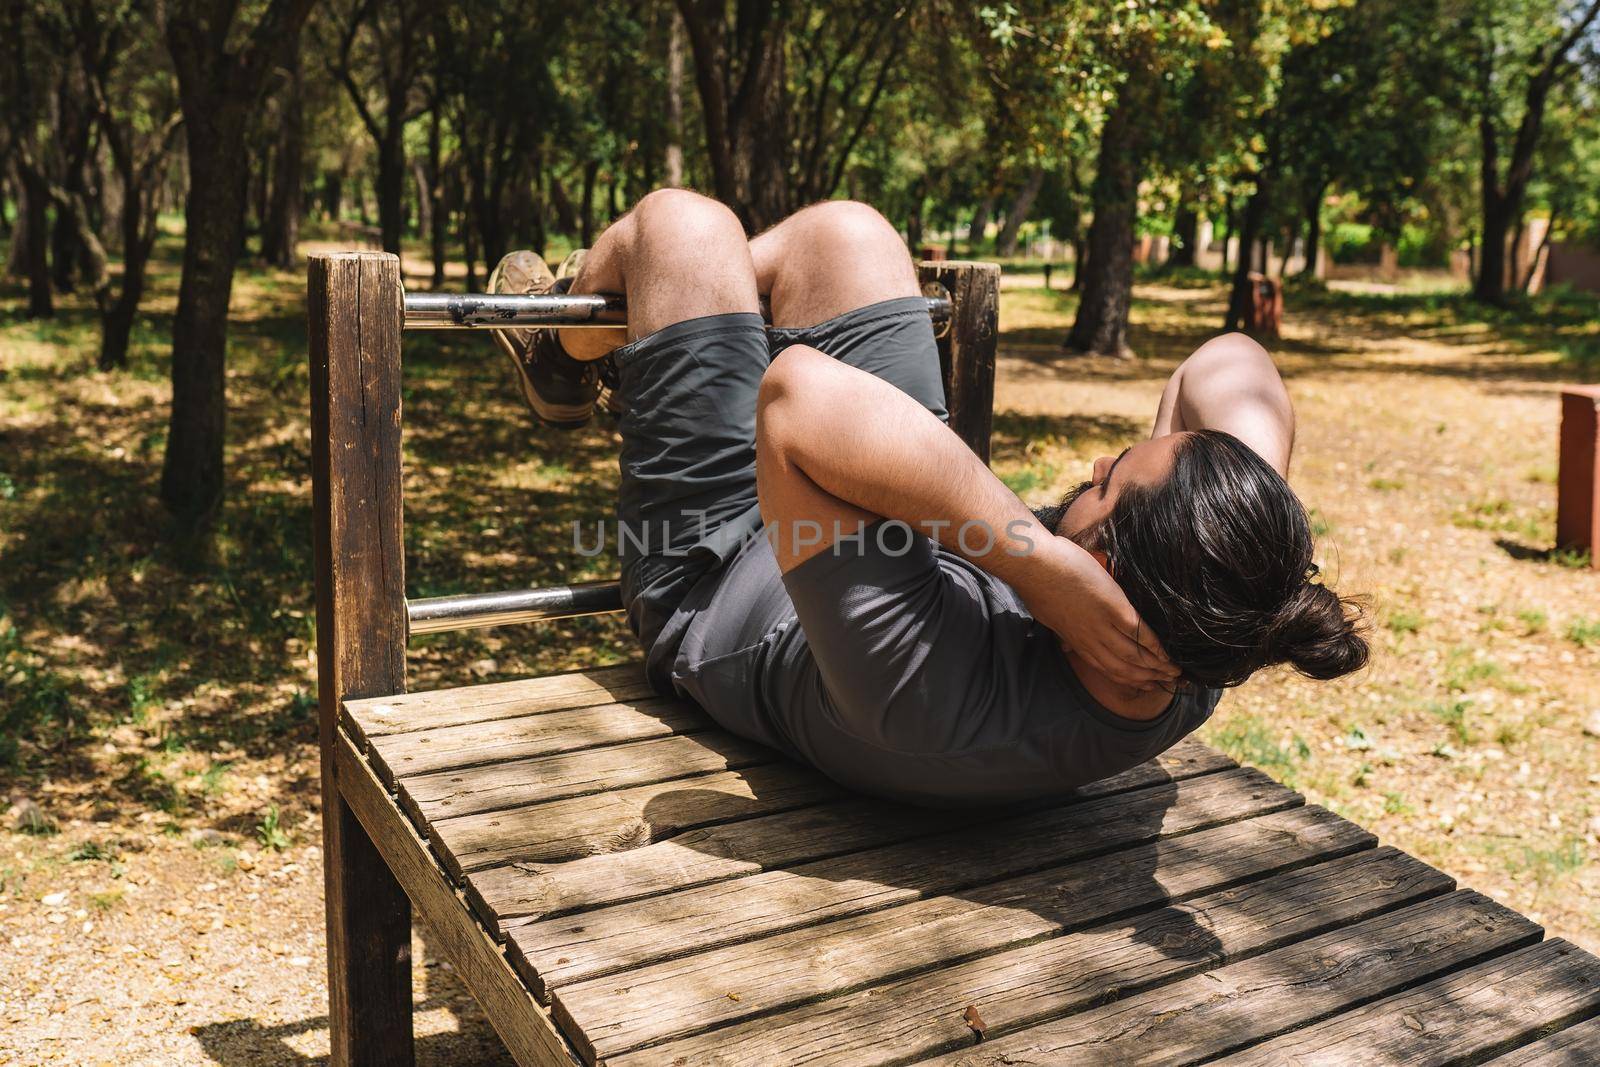 young athletic man doing sit-ups in an outdoor public park. young athlete preparing for a championship. health and wellness lifestyle. Natural sunlight, background of natural vegetation, forest, sportswear.